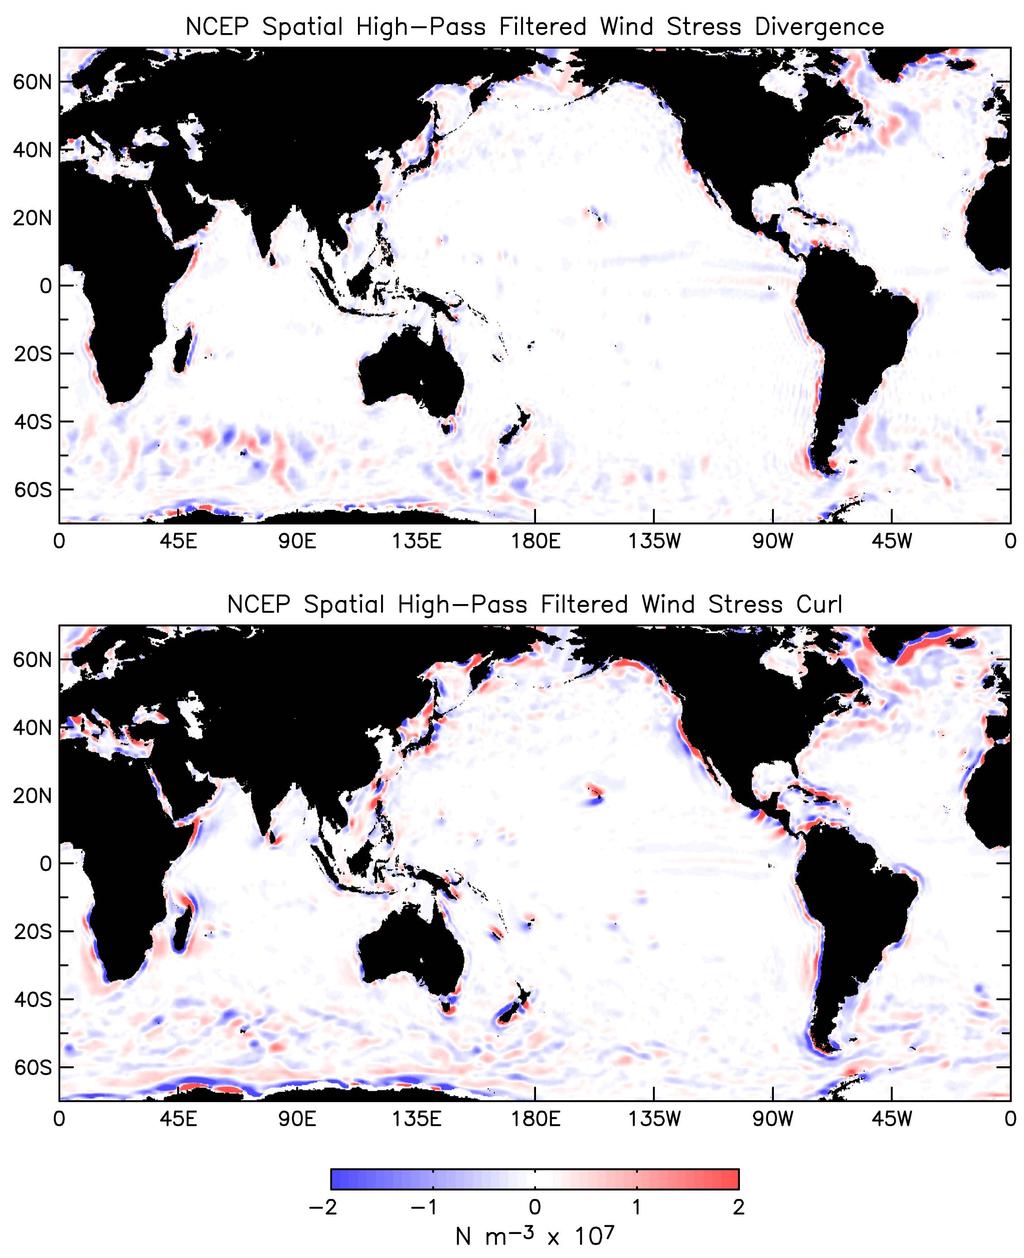 Fig. S3. The same as Fig. S2, except computed from the 1º by 1º by 6-hour analyses of winds at 10 m from the U.S. National Centers for Environmental Prediction (NCEP) operational numerical weather prediction model.